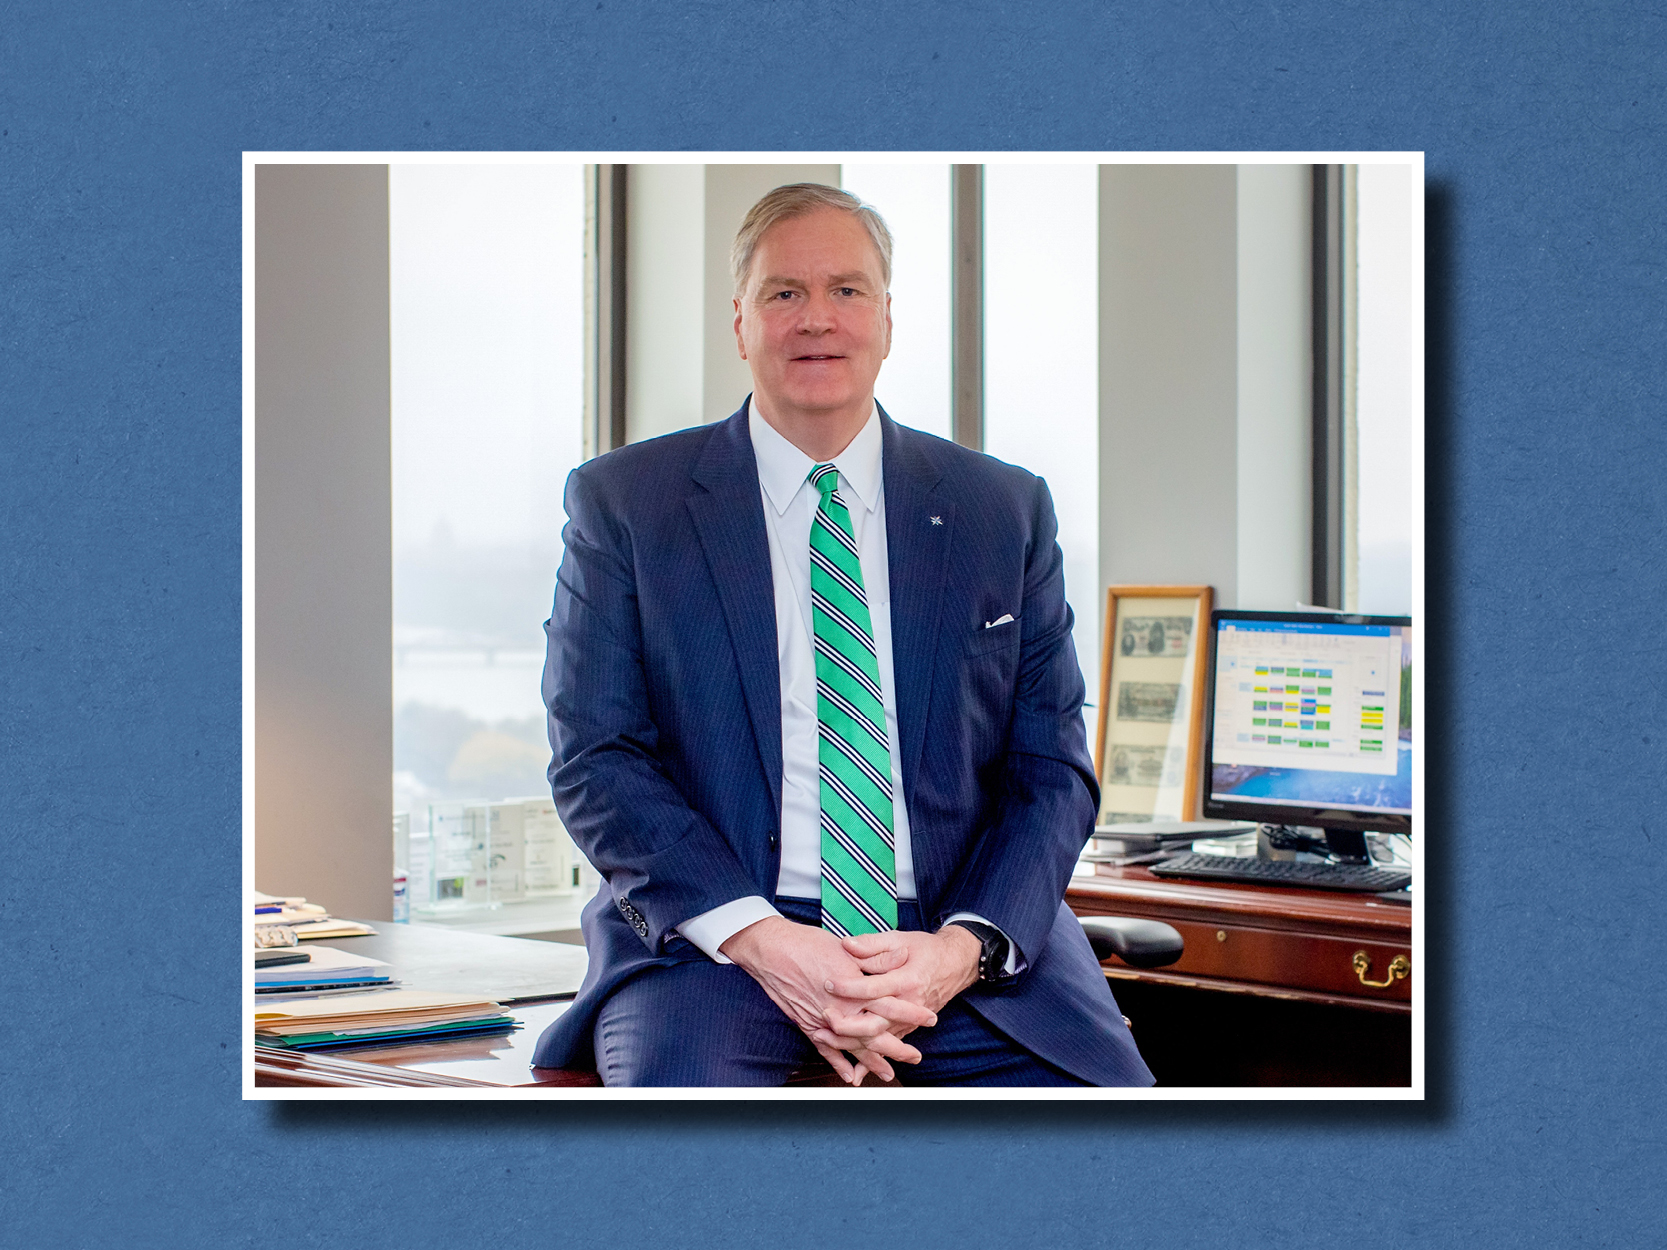 Photo of Five Star Bank, Martin Birmingham President and CEO in his office.